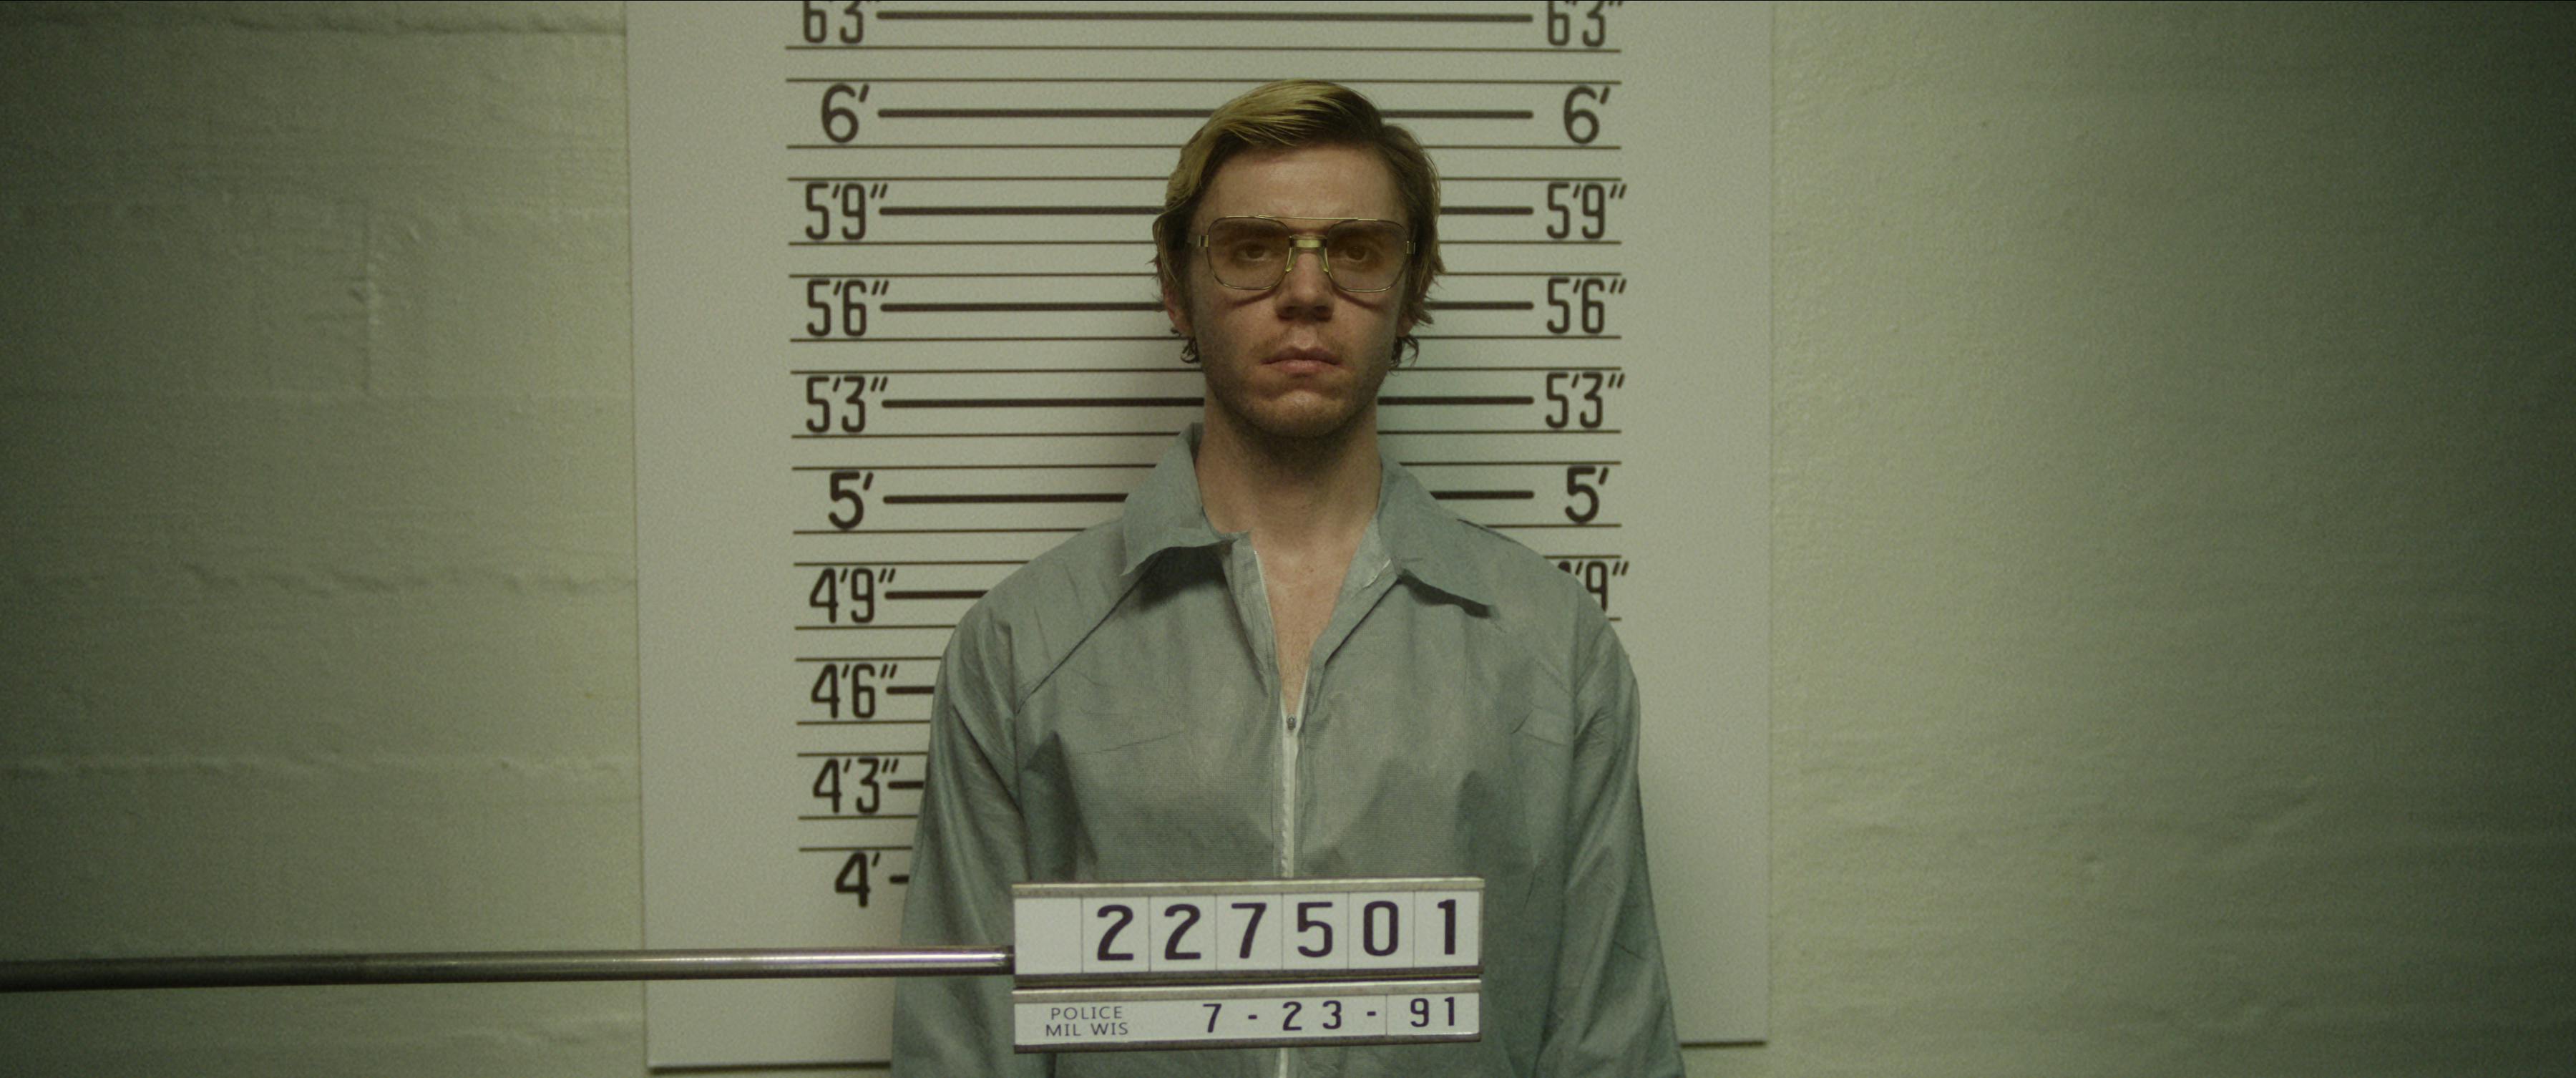 Jeffrey Dahmer (Evan Peters) stands in front of a wall getting his mugshot taken.